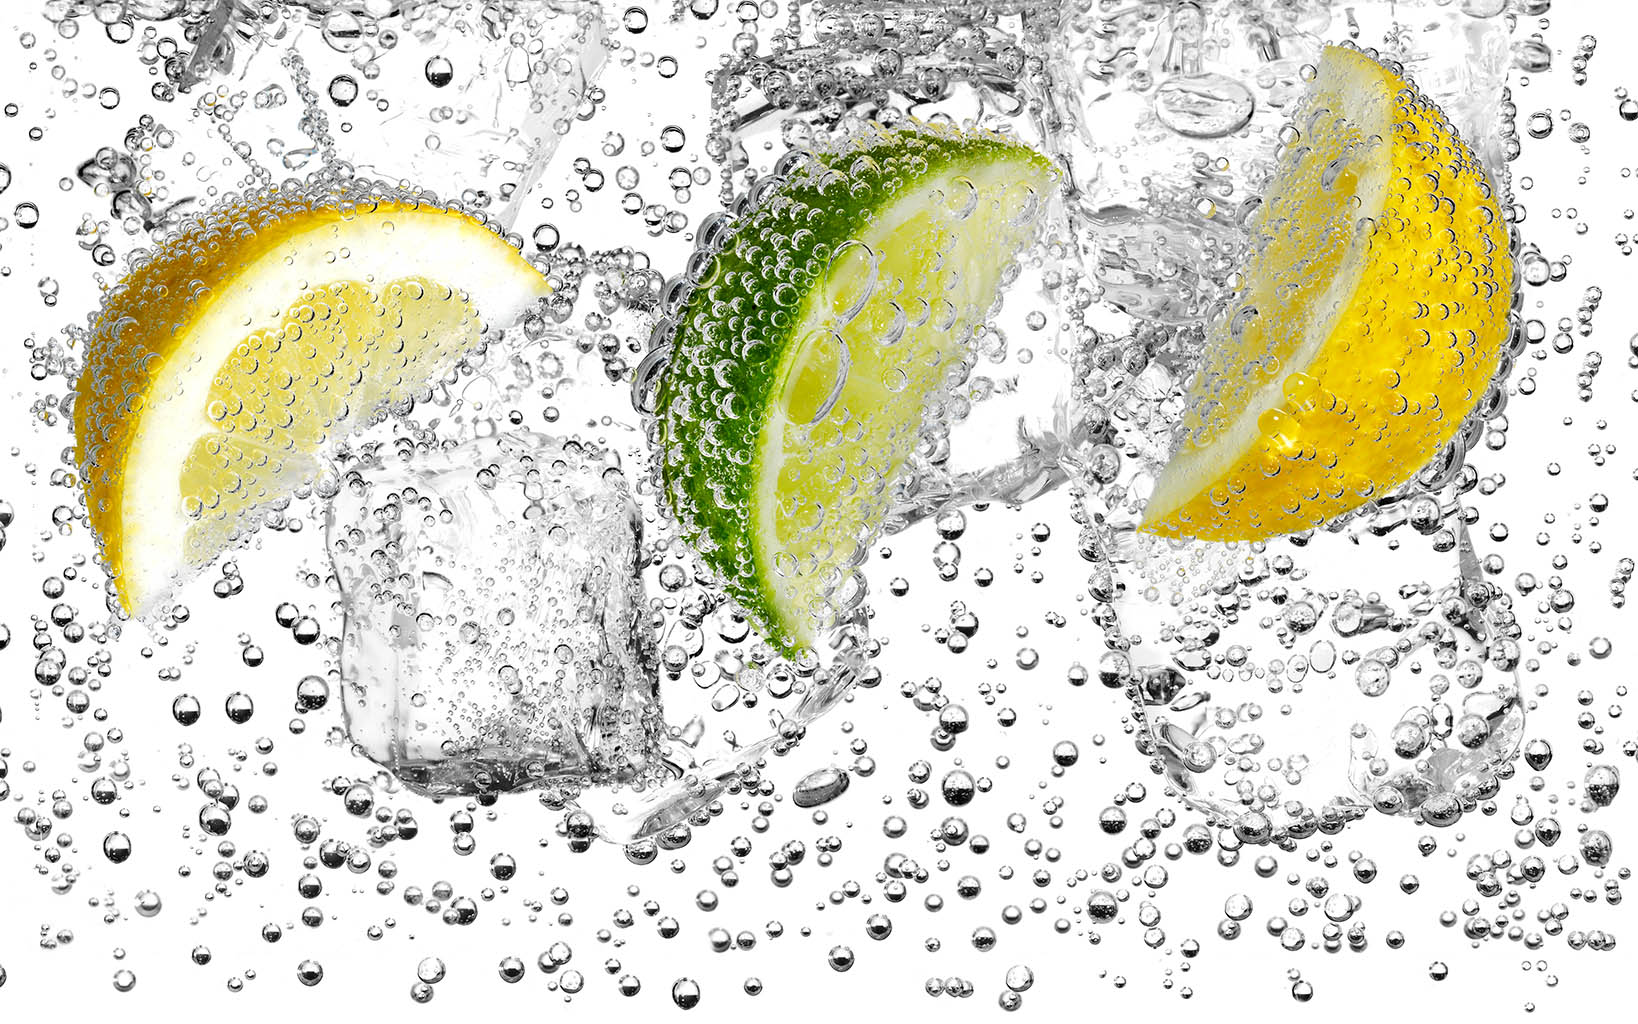 Packshot Factory - Ingredients - Lemons and lime in water with ice and bubbles